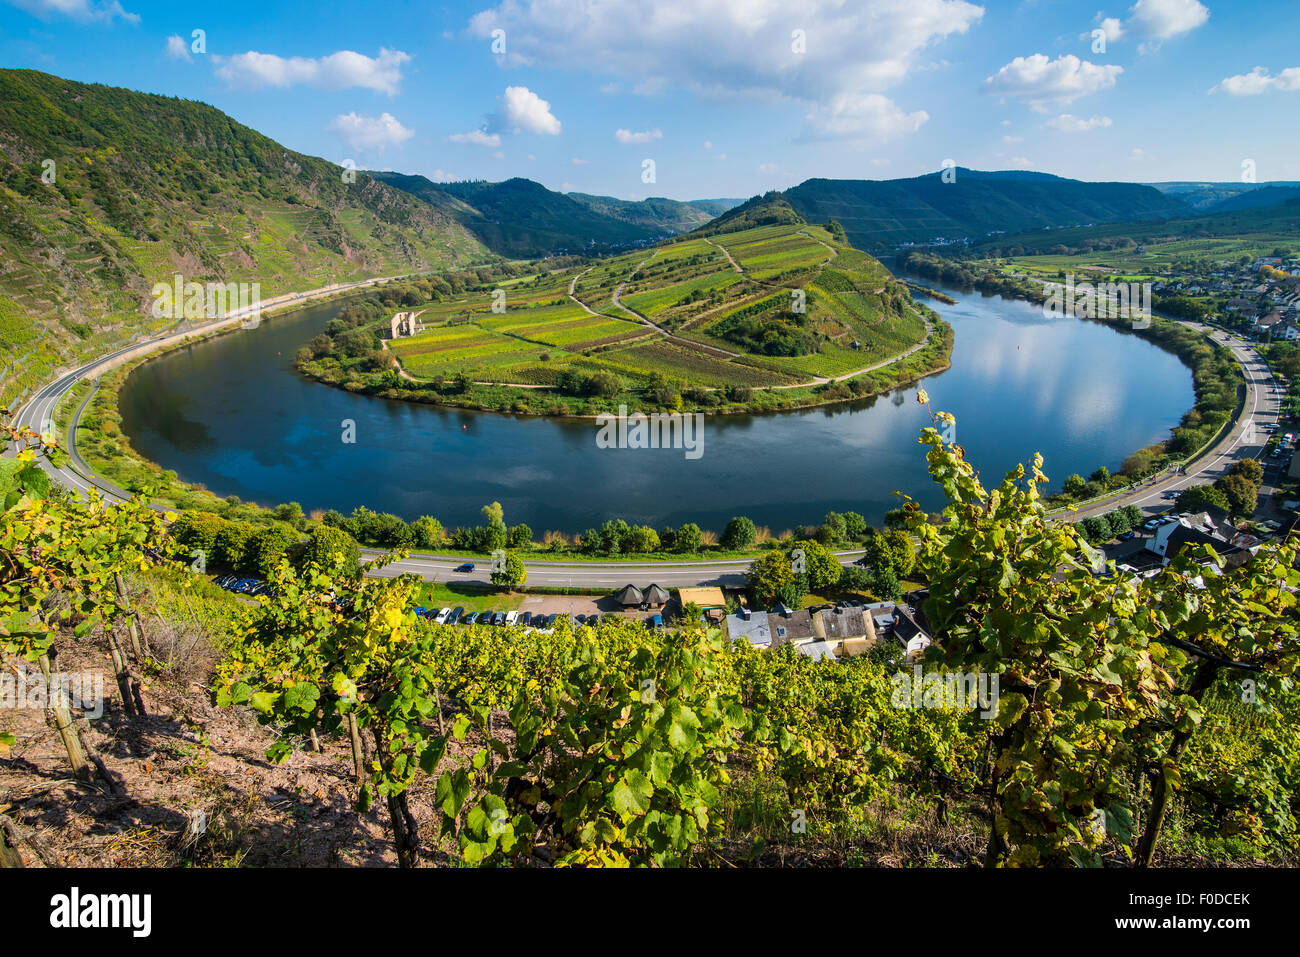 River bend of the Moselle, Bremm, Moselle valley, Rhineland-Palatinate, Germany Stock Photo